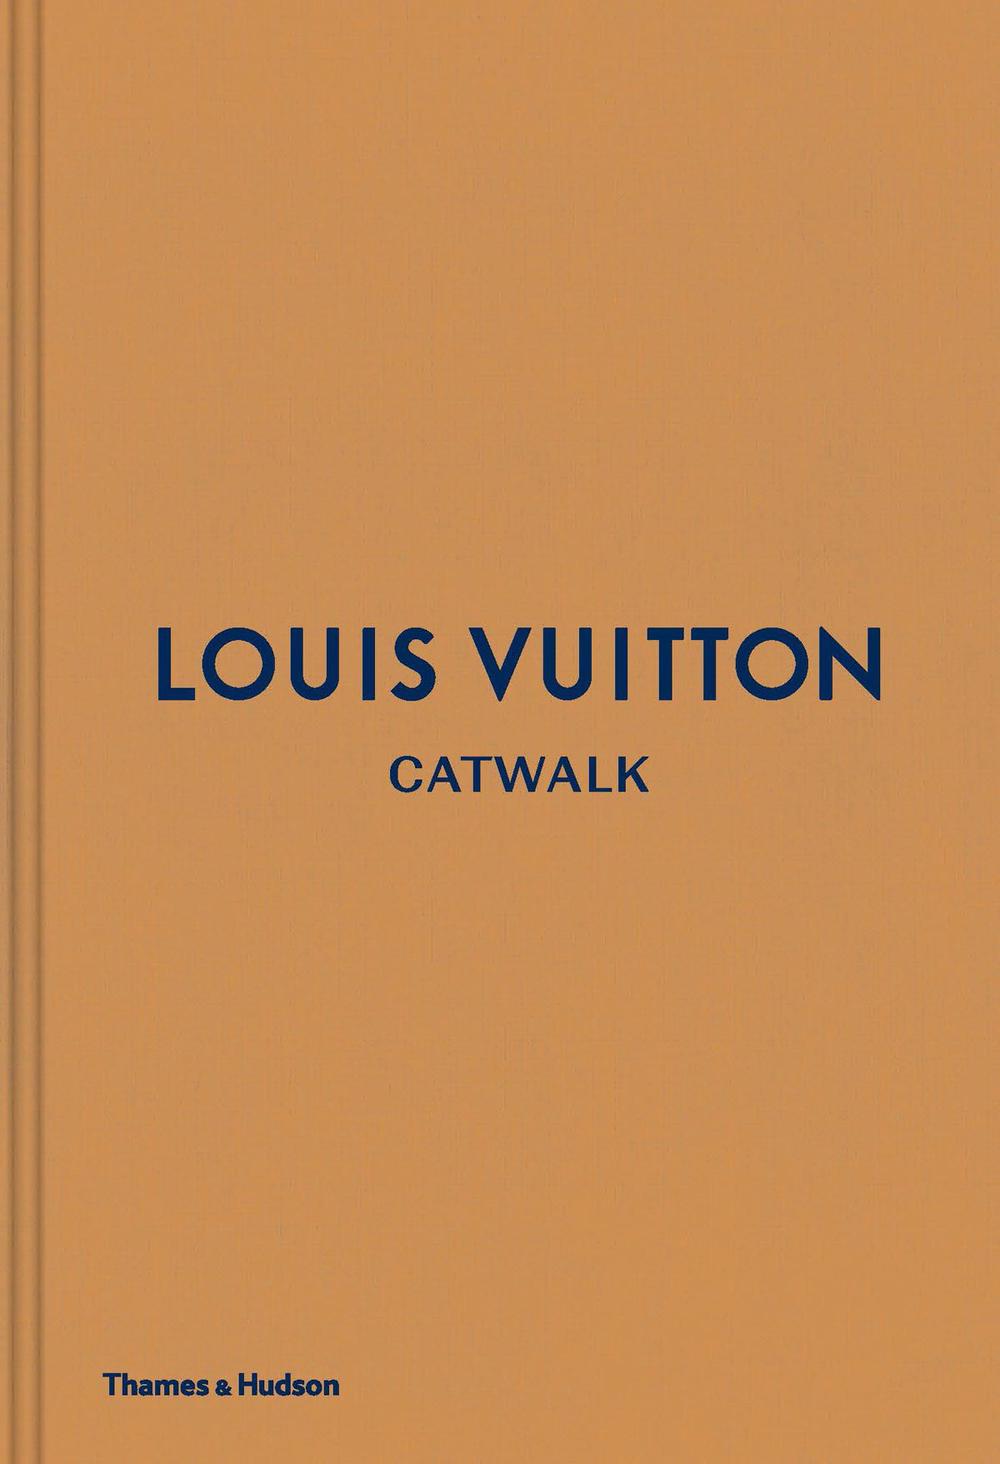 Louis Vuitton Catwalk: The Complete Fashion Collections by Jo Ellison (English) 9780500519943 | eBay